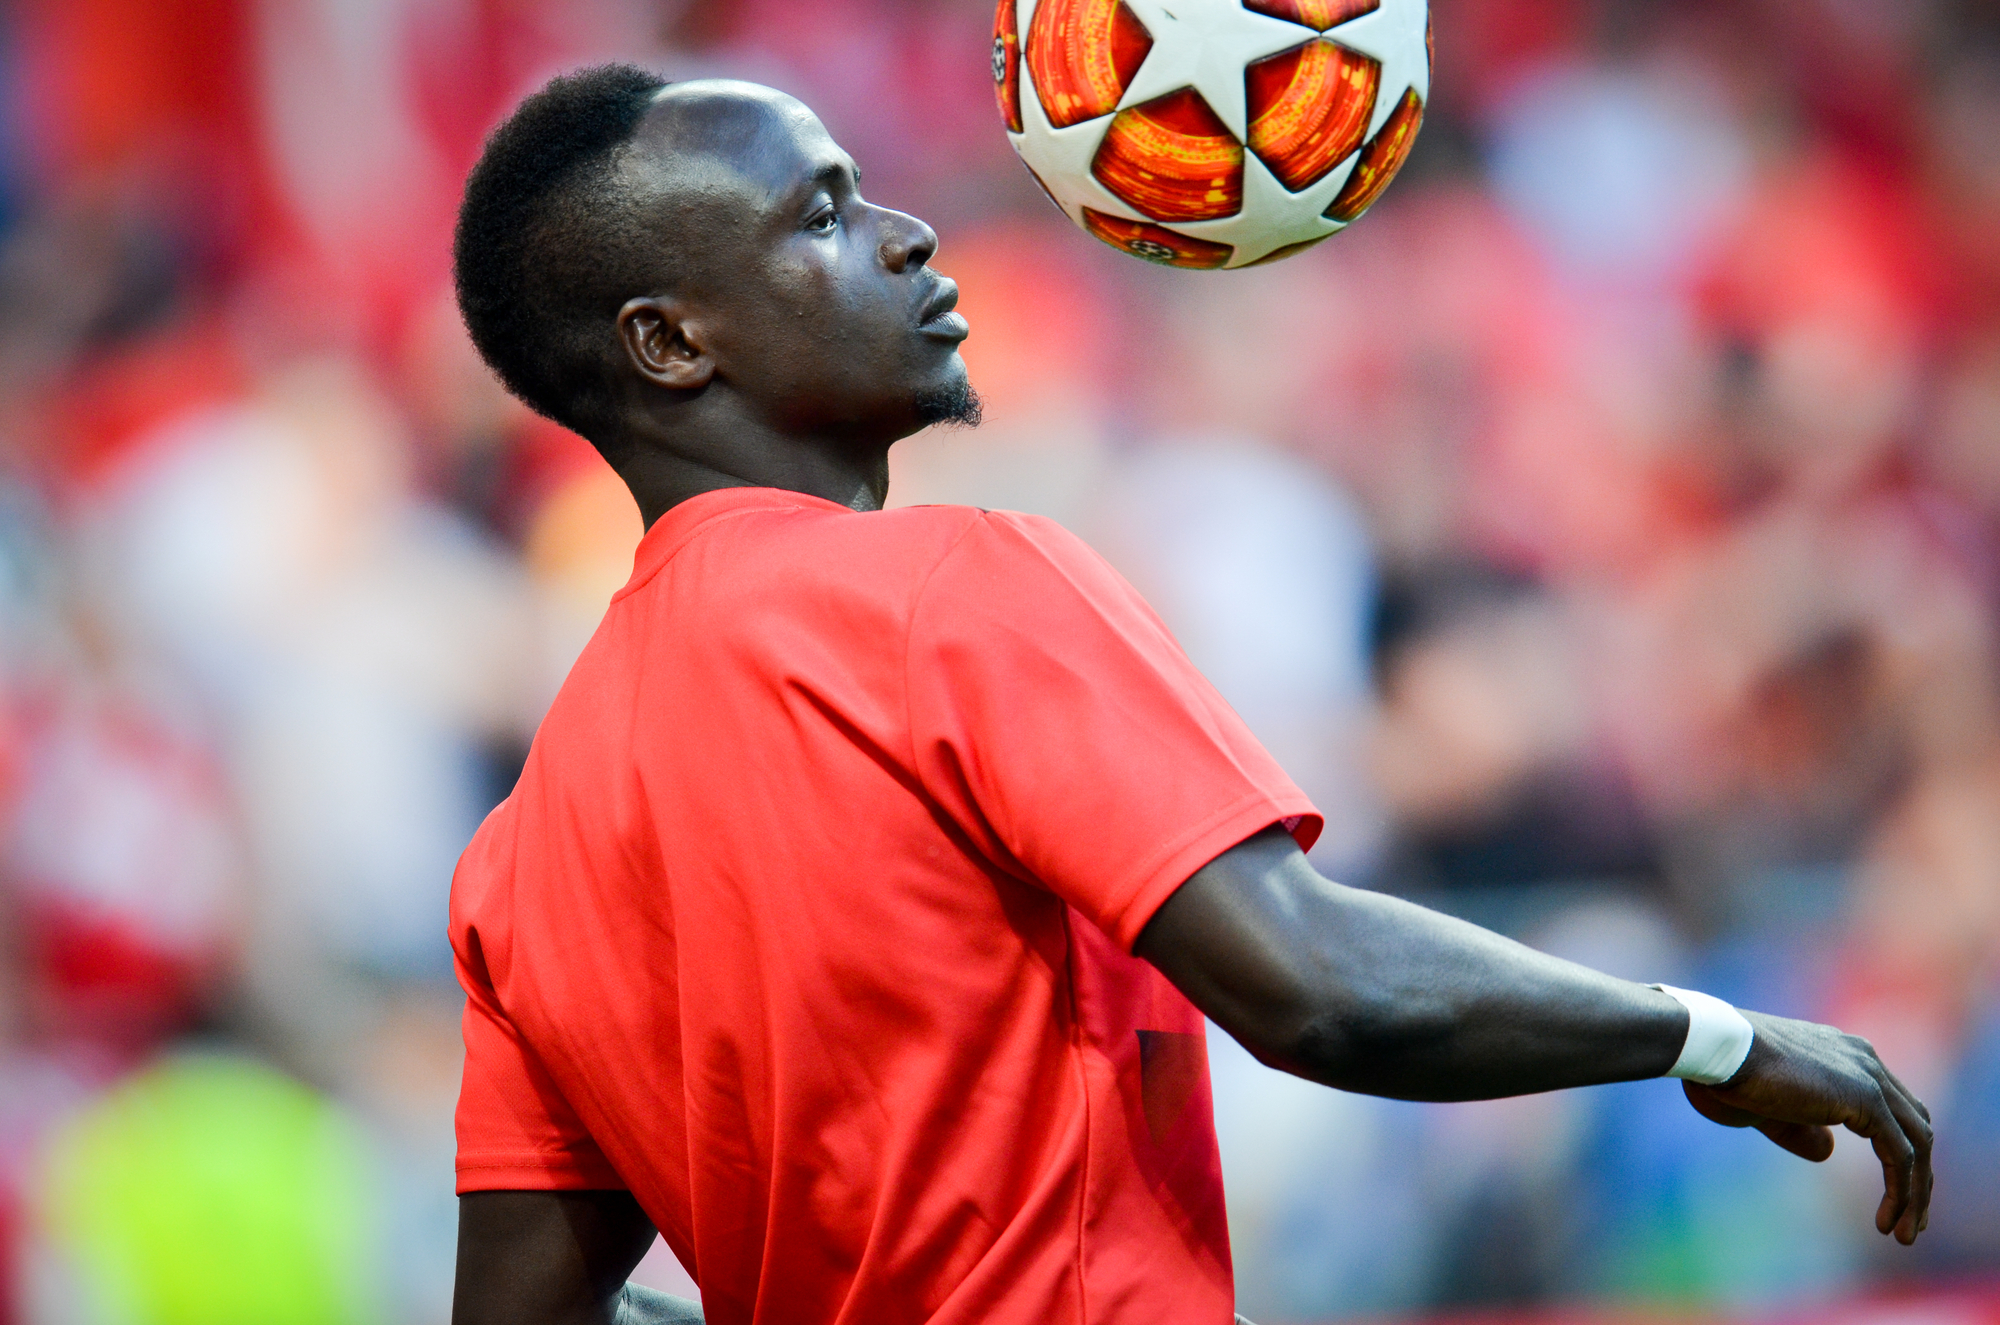 The Mané from the other side of the field